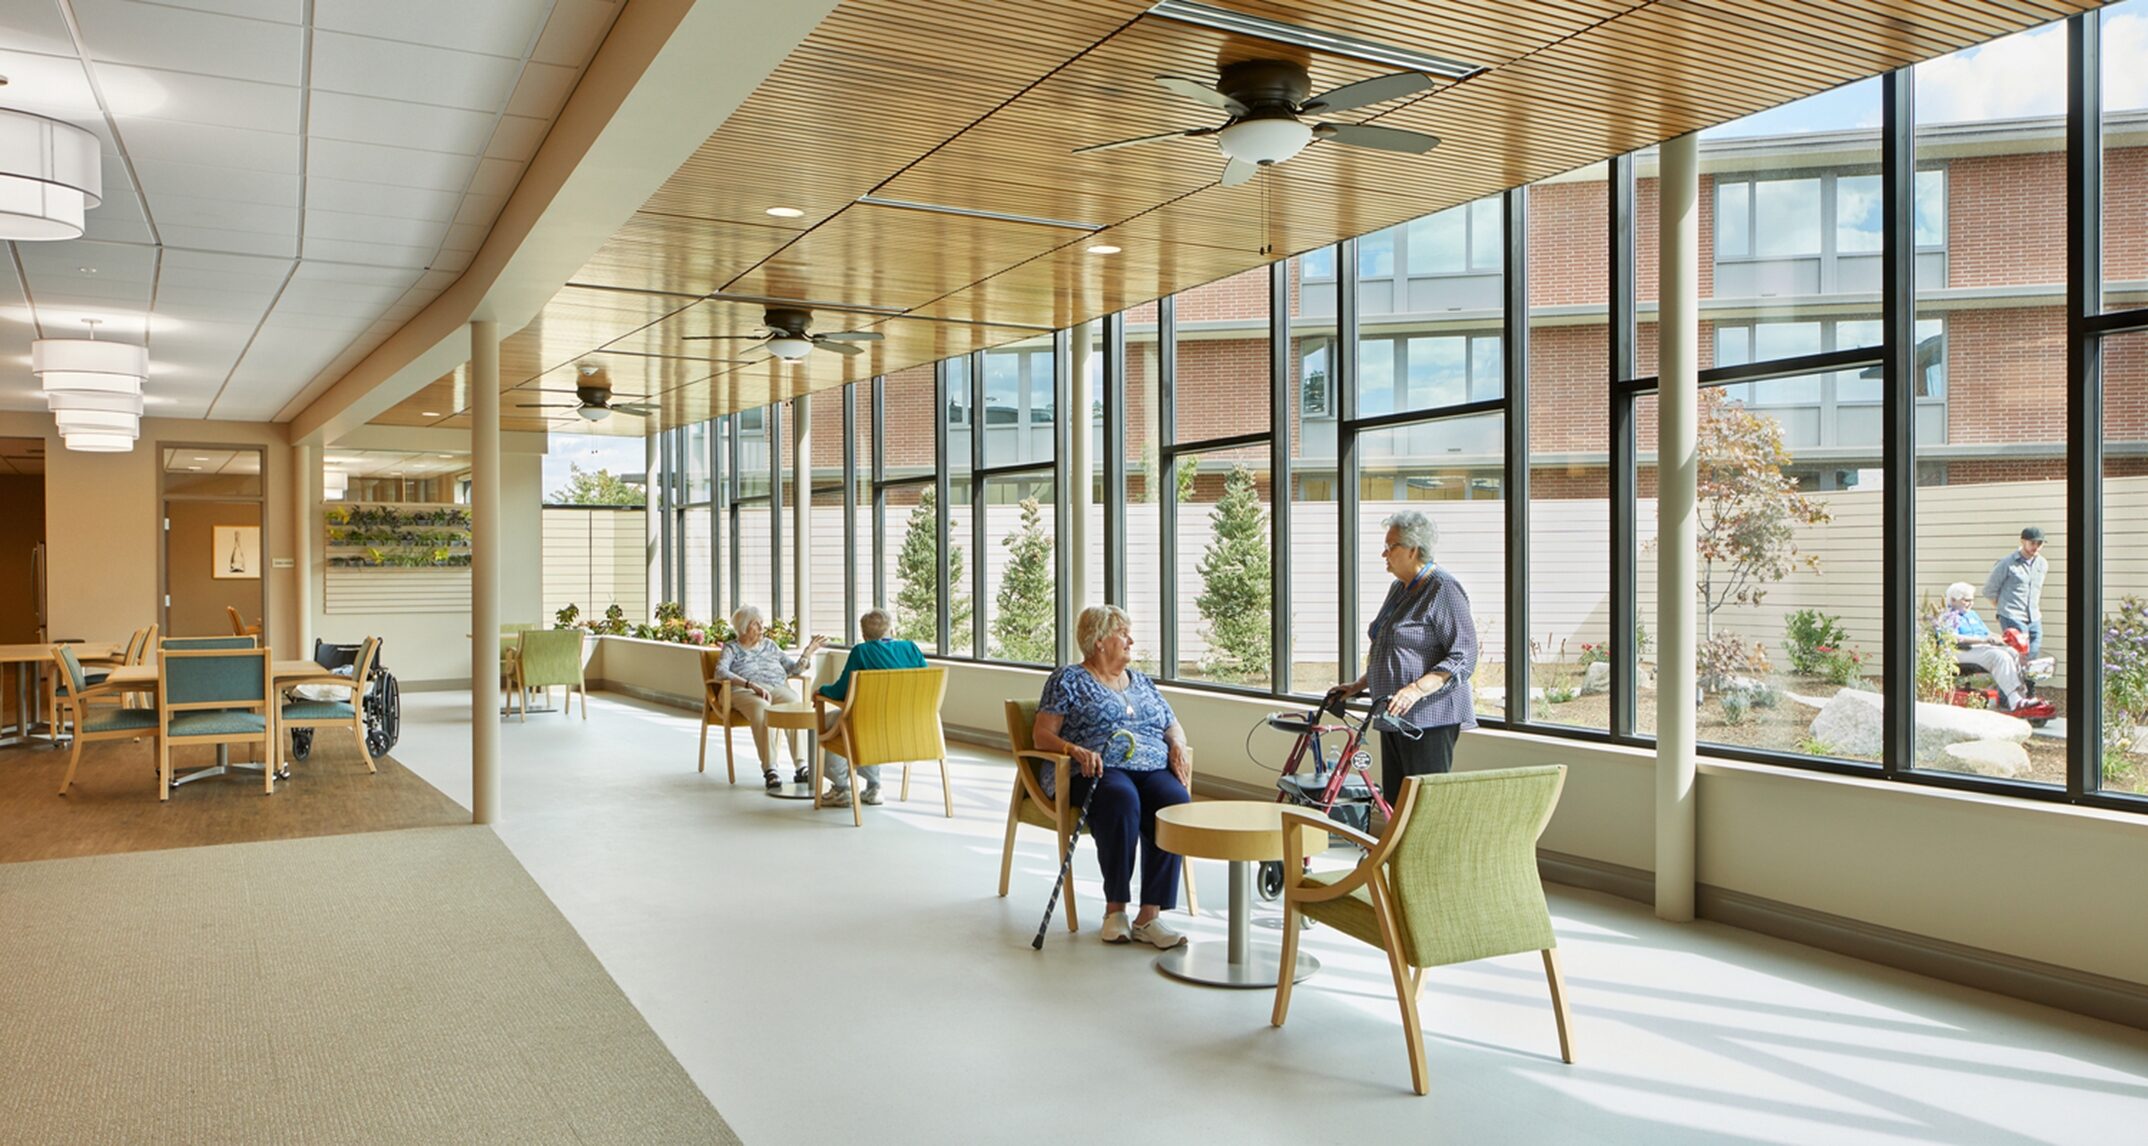 Large windows in the common spaces at Riverview Retirement’s
memory care facility not only increase daylighting, but provide unobstructed
views to an interior garden that both residents and staff regularly enjoy. -
NAC Architecture